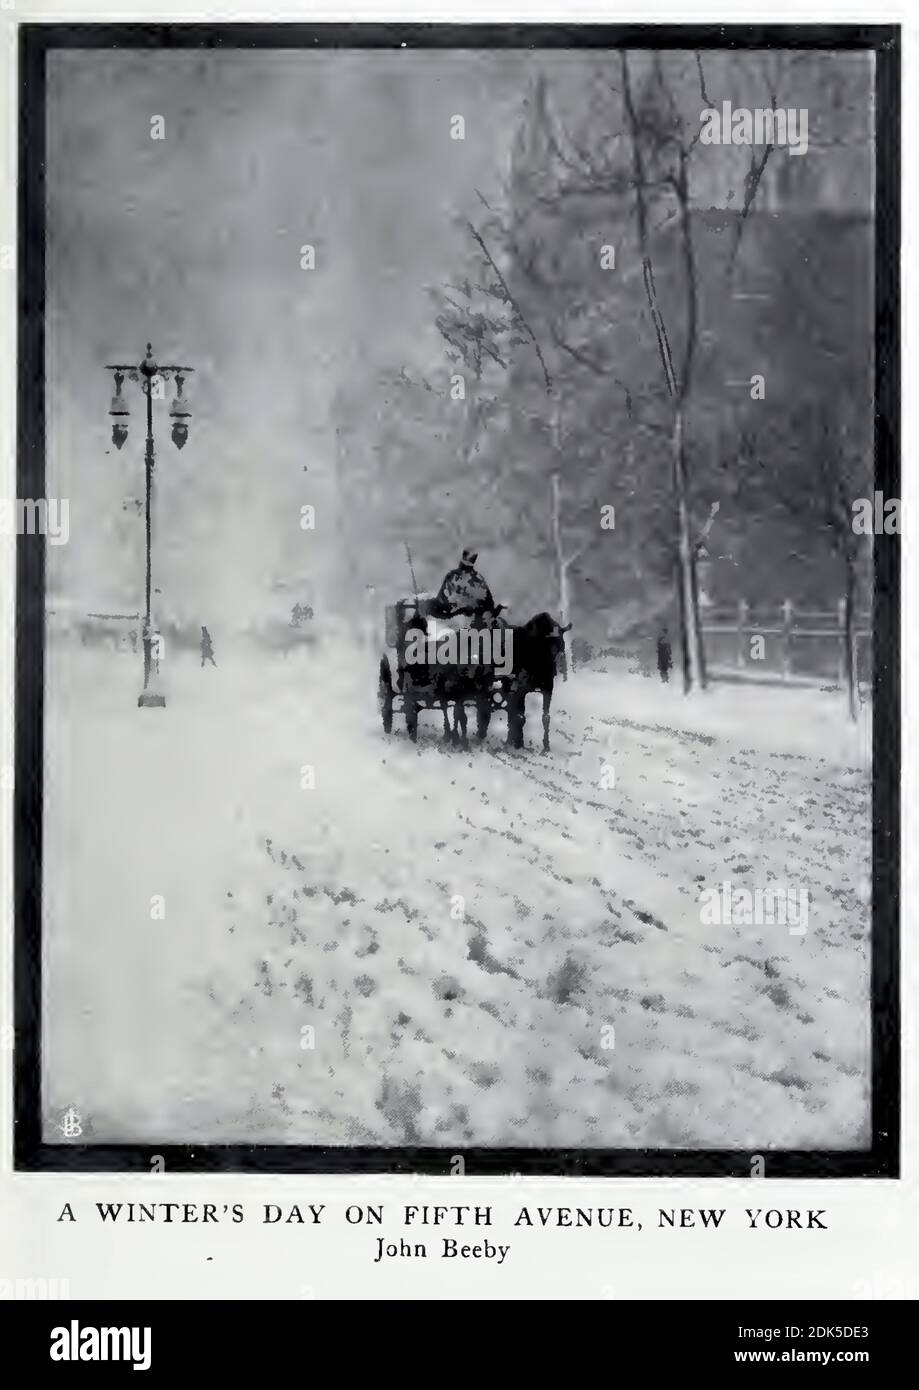 Vintage photograph entitled A Winter's Day on Fifth Avenue, New York by John Beeby. A horse and carriage passing on a snowy fifth avenue. Cool. Stock Photo